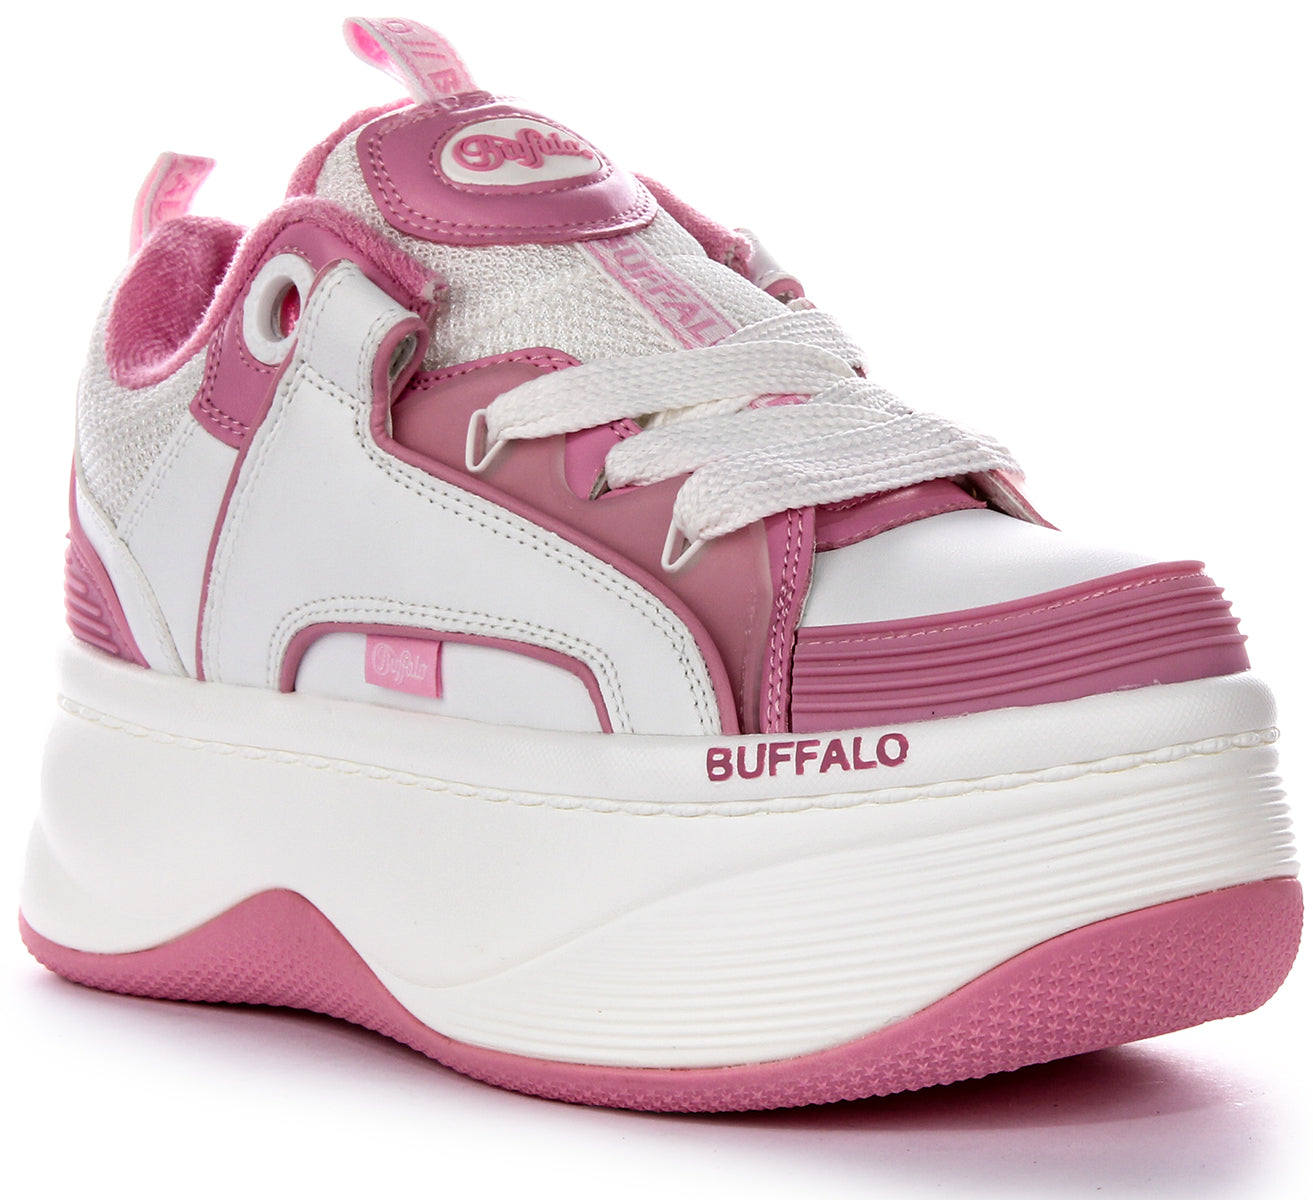 Buffalo London Pink Holographic Sneakers | Vinted